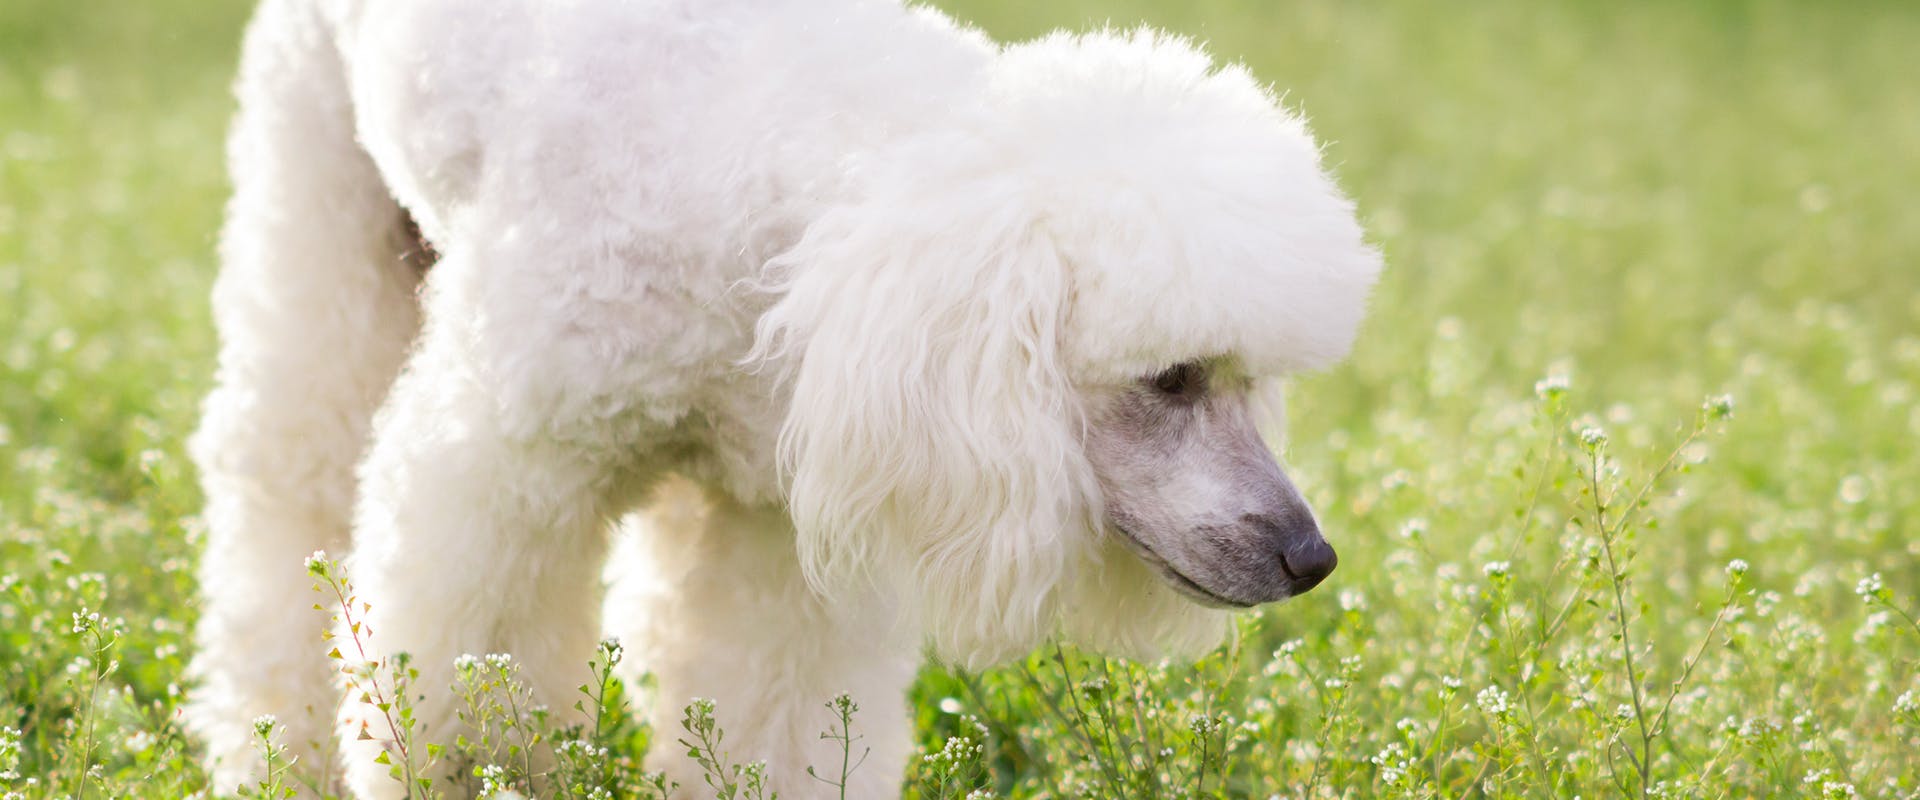 A Poodle sniffing the grass